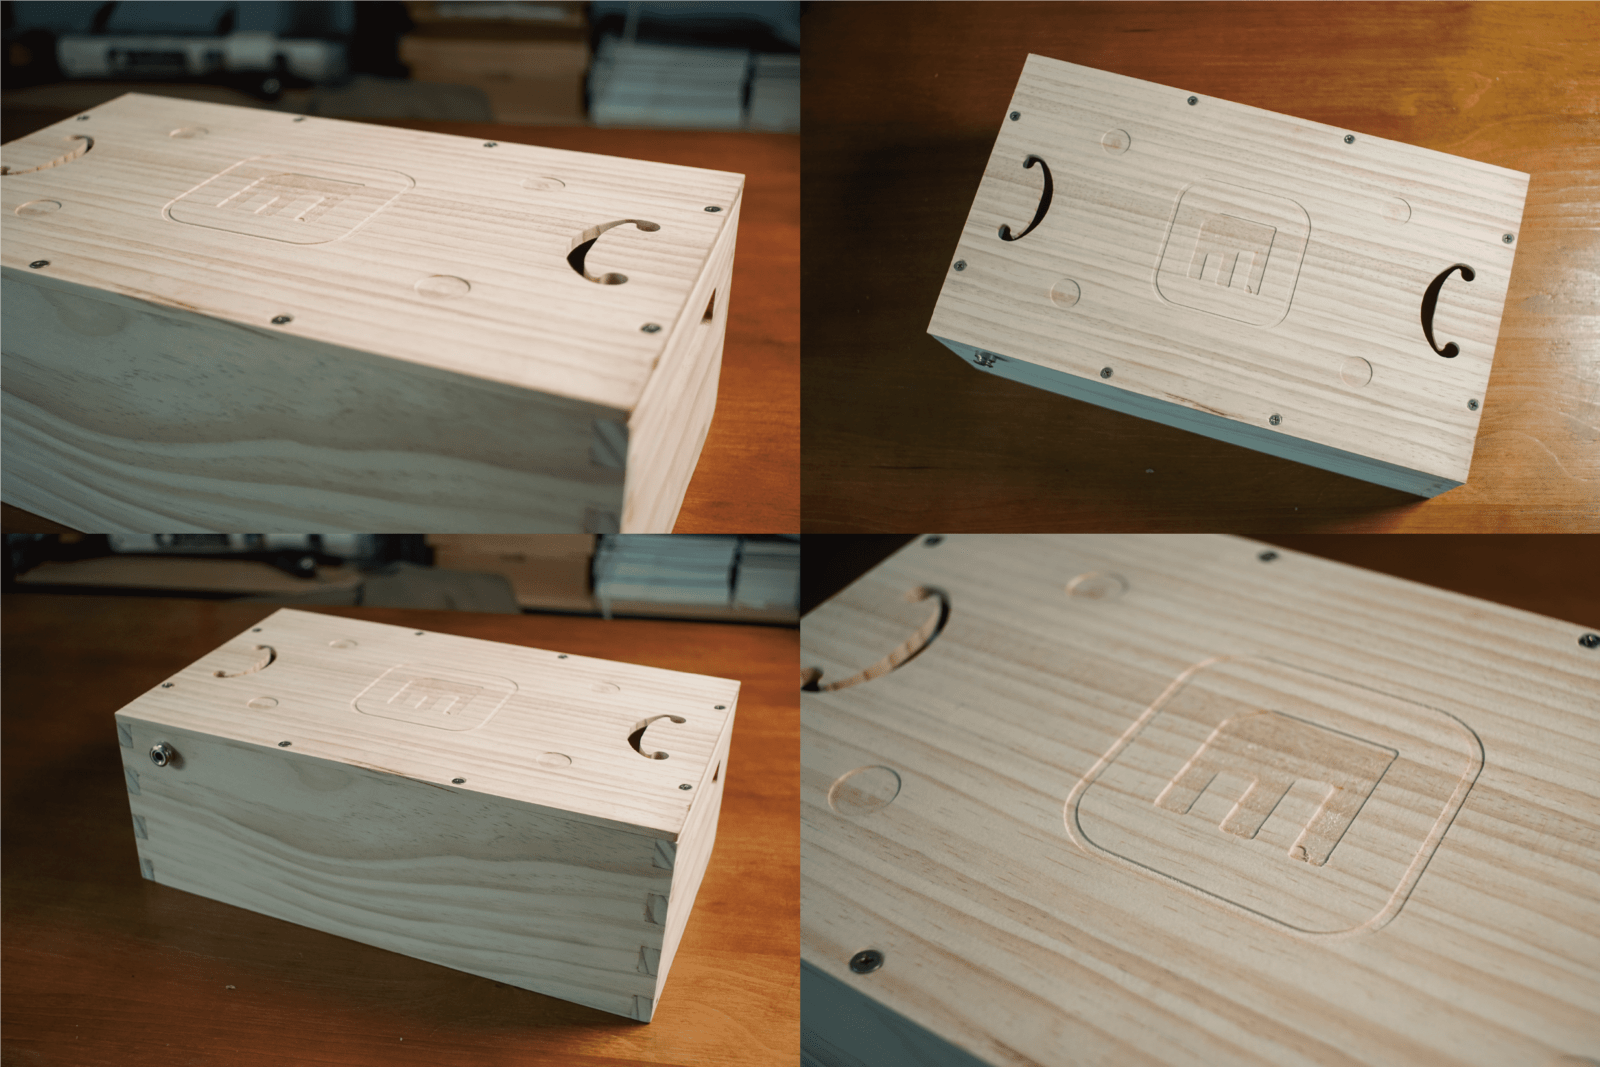 This Muro Box-N40 Resonance Box made with pinewood features a specially designed C-shaped soundhole on the top, mimicking the sound emission principle of a violin. The curved square groove forming the Muro Box logo on the top is designed to securely accommodate the wooden feet of the N20 music box, preventing it from accidentally falling from the resonance box. There are also 4 small circled grooves for securing the wood box feets of Muro Box-N40 on the resonance box. The purpose of having multiple grooves is to allow customers who have purchased both the N40 and N20 Muro Box music boxes to use the same resonance box for amplifying the sound as they wish.